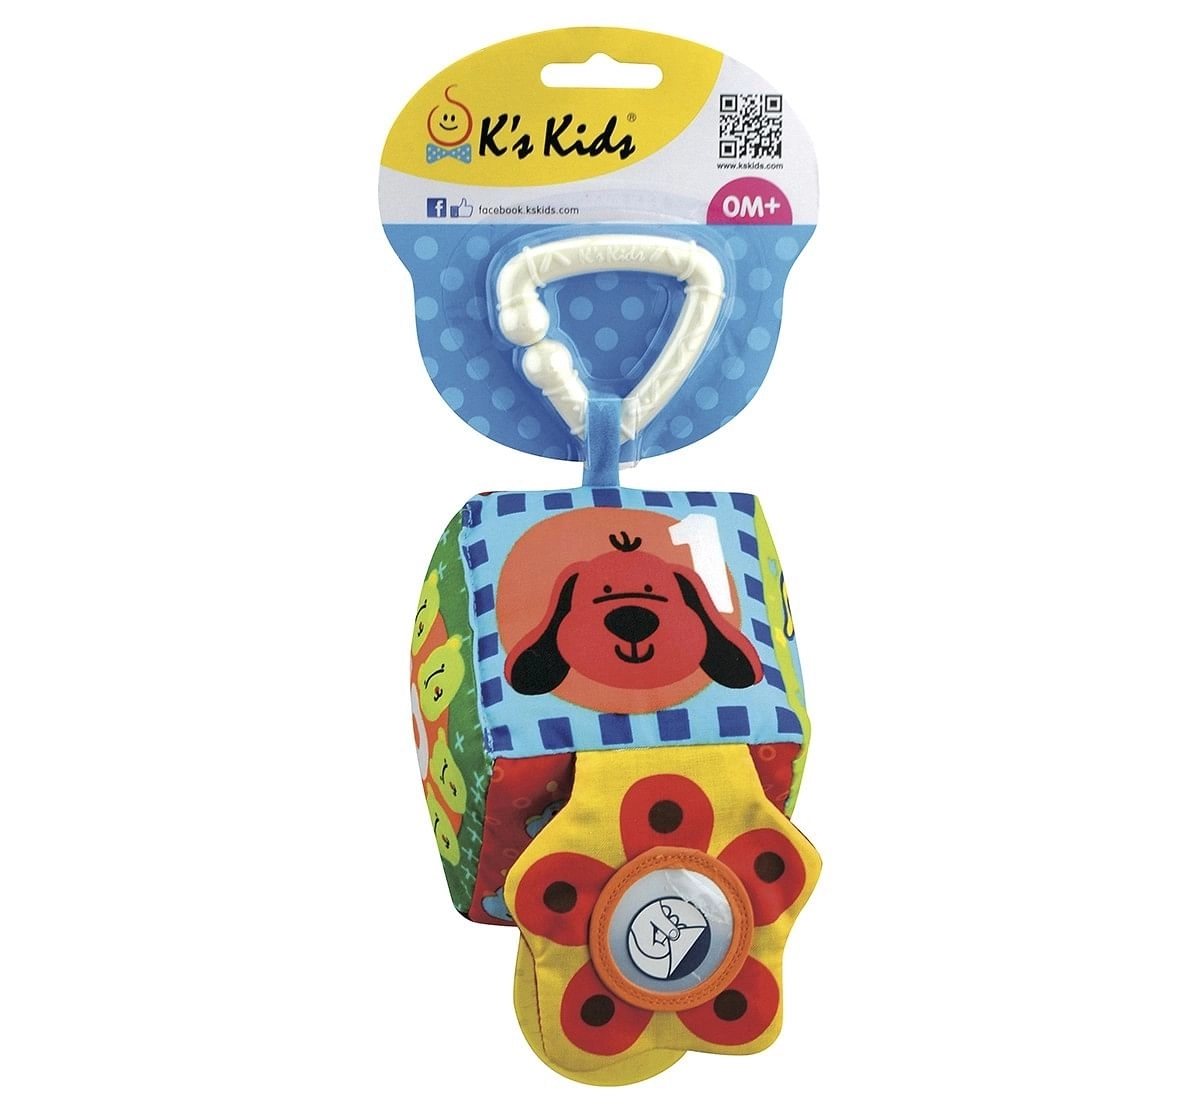 K'S Kids Baby'S First Cube Early Learner Toys for Kids age 12M+ 